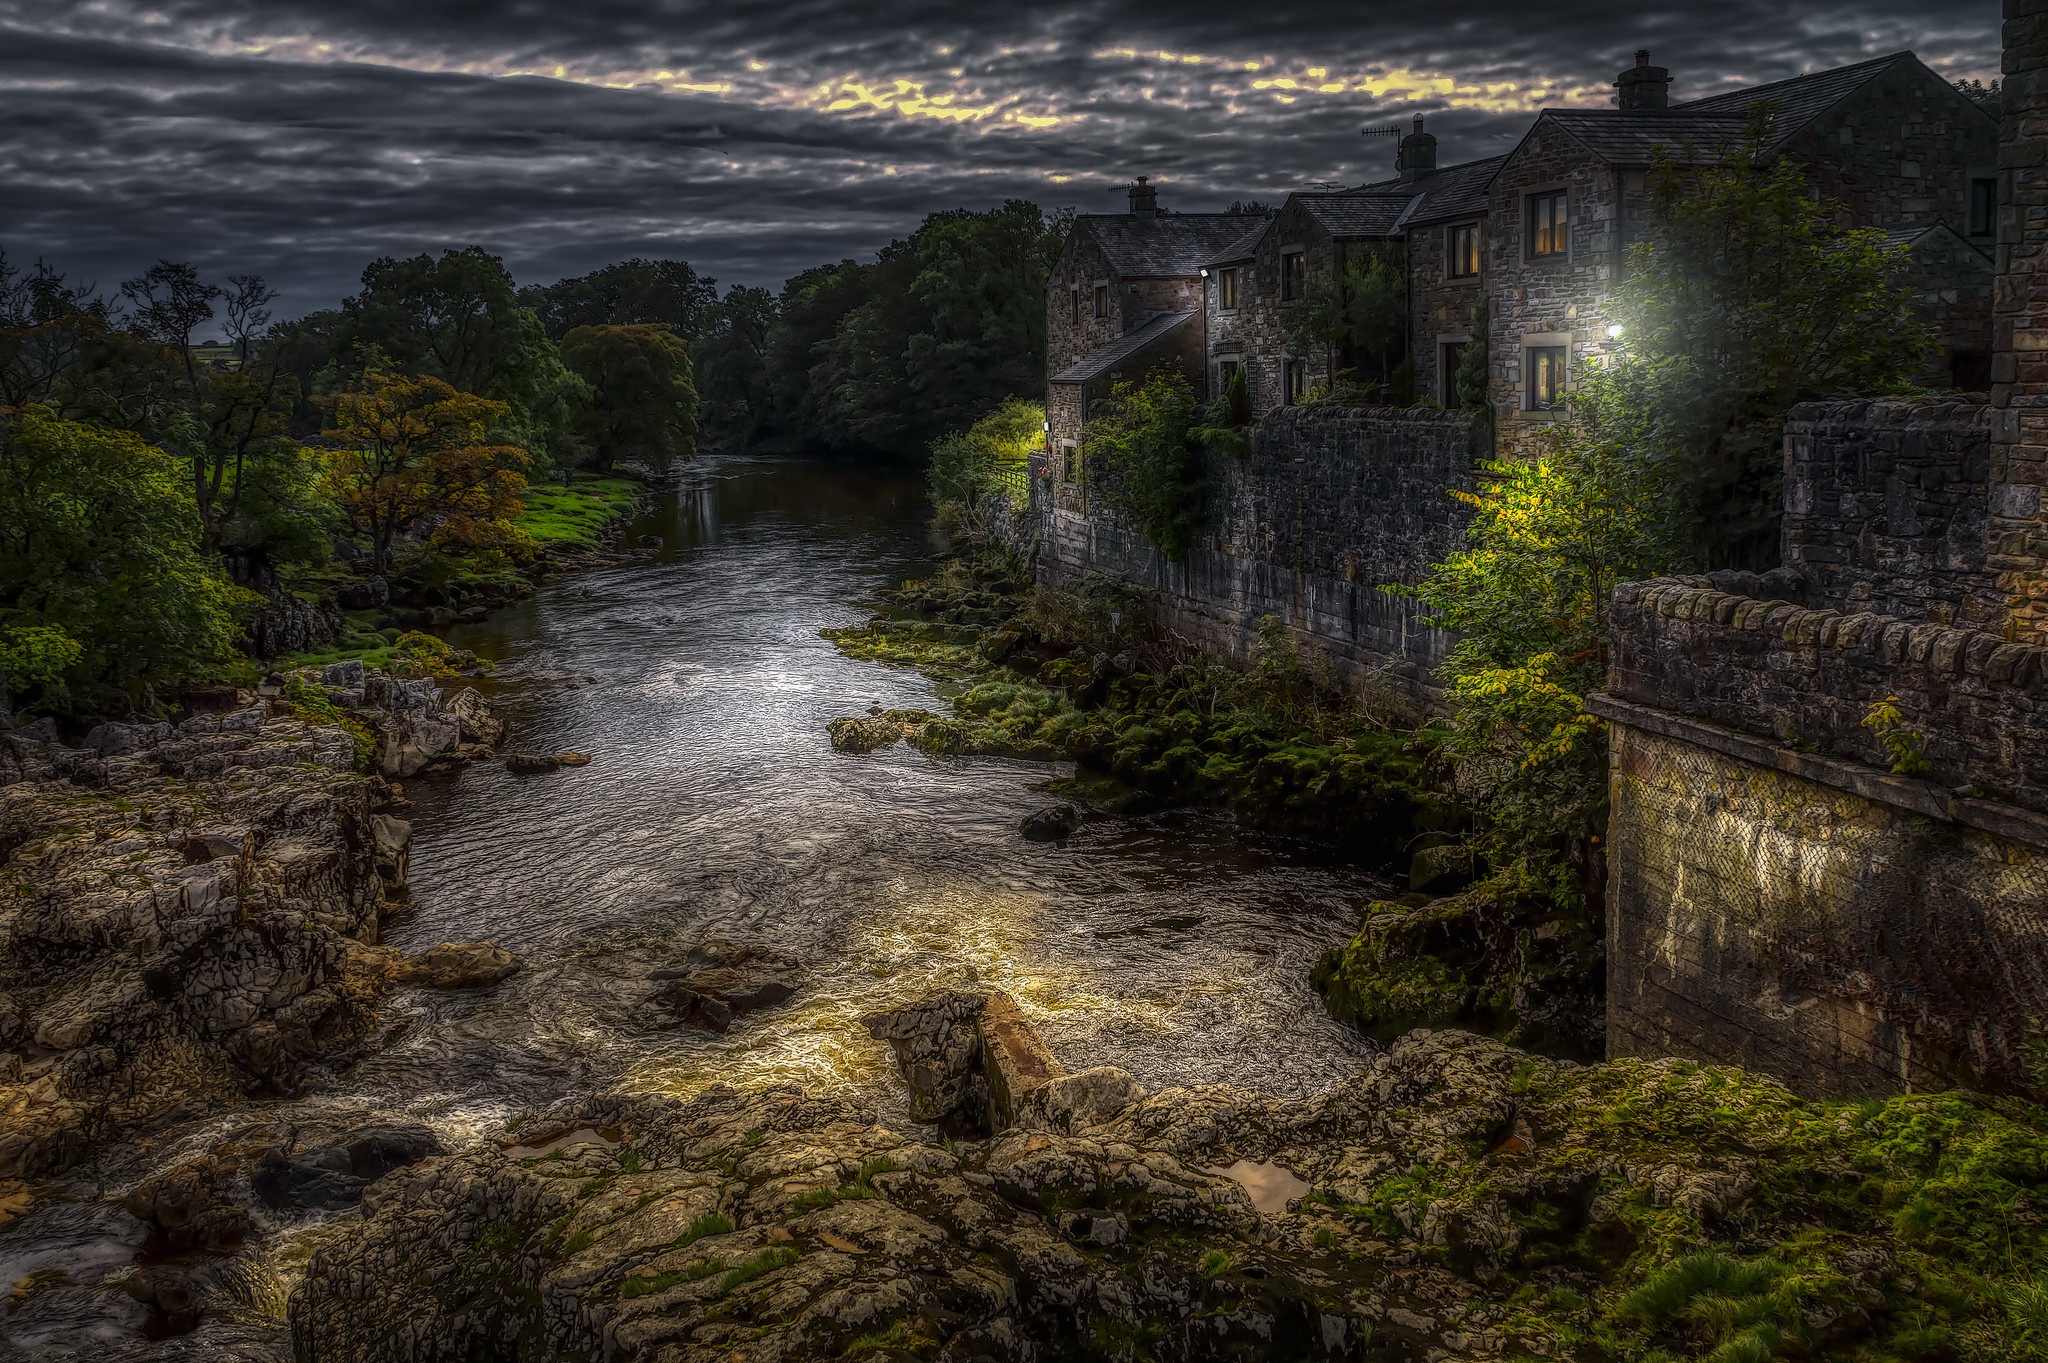 General 2048x1363 dark night house river building HDR low light